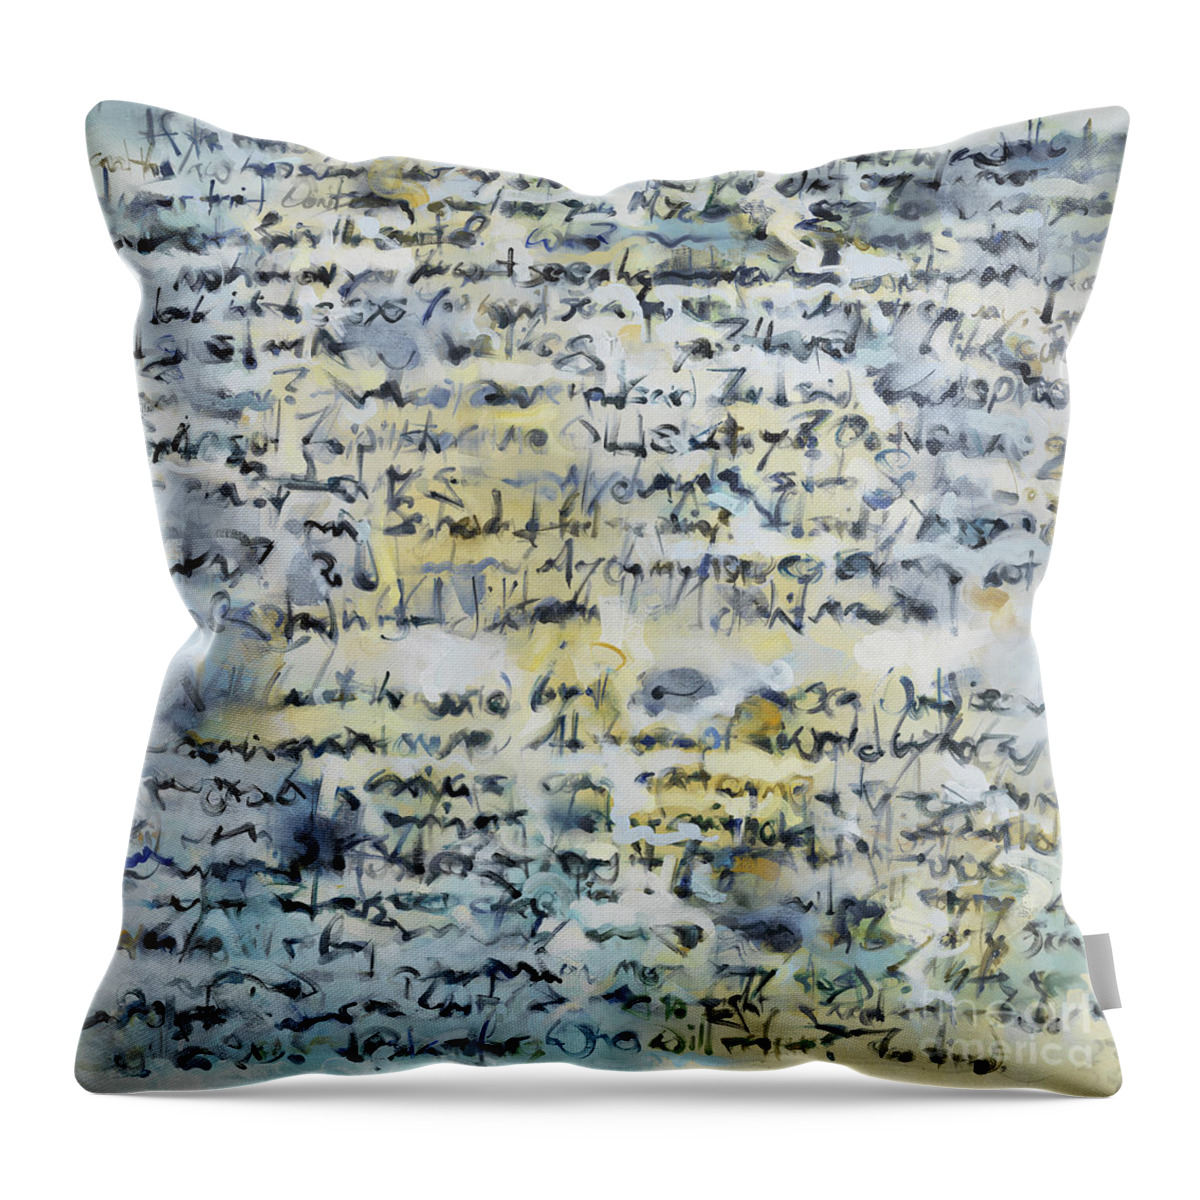 Teal Throw Pillow featuring the painting Obsessions by Ritchard Rodriguez